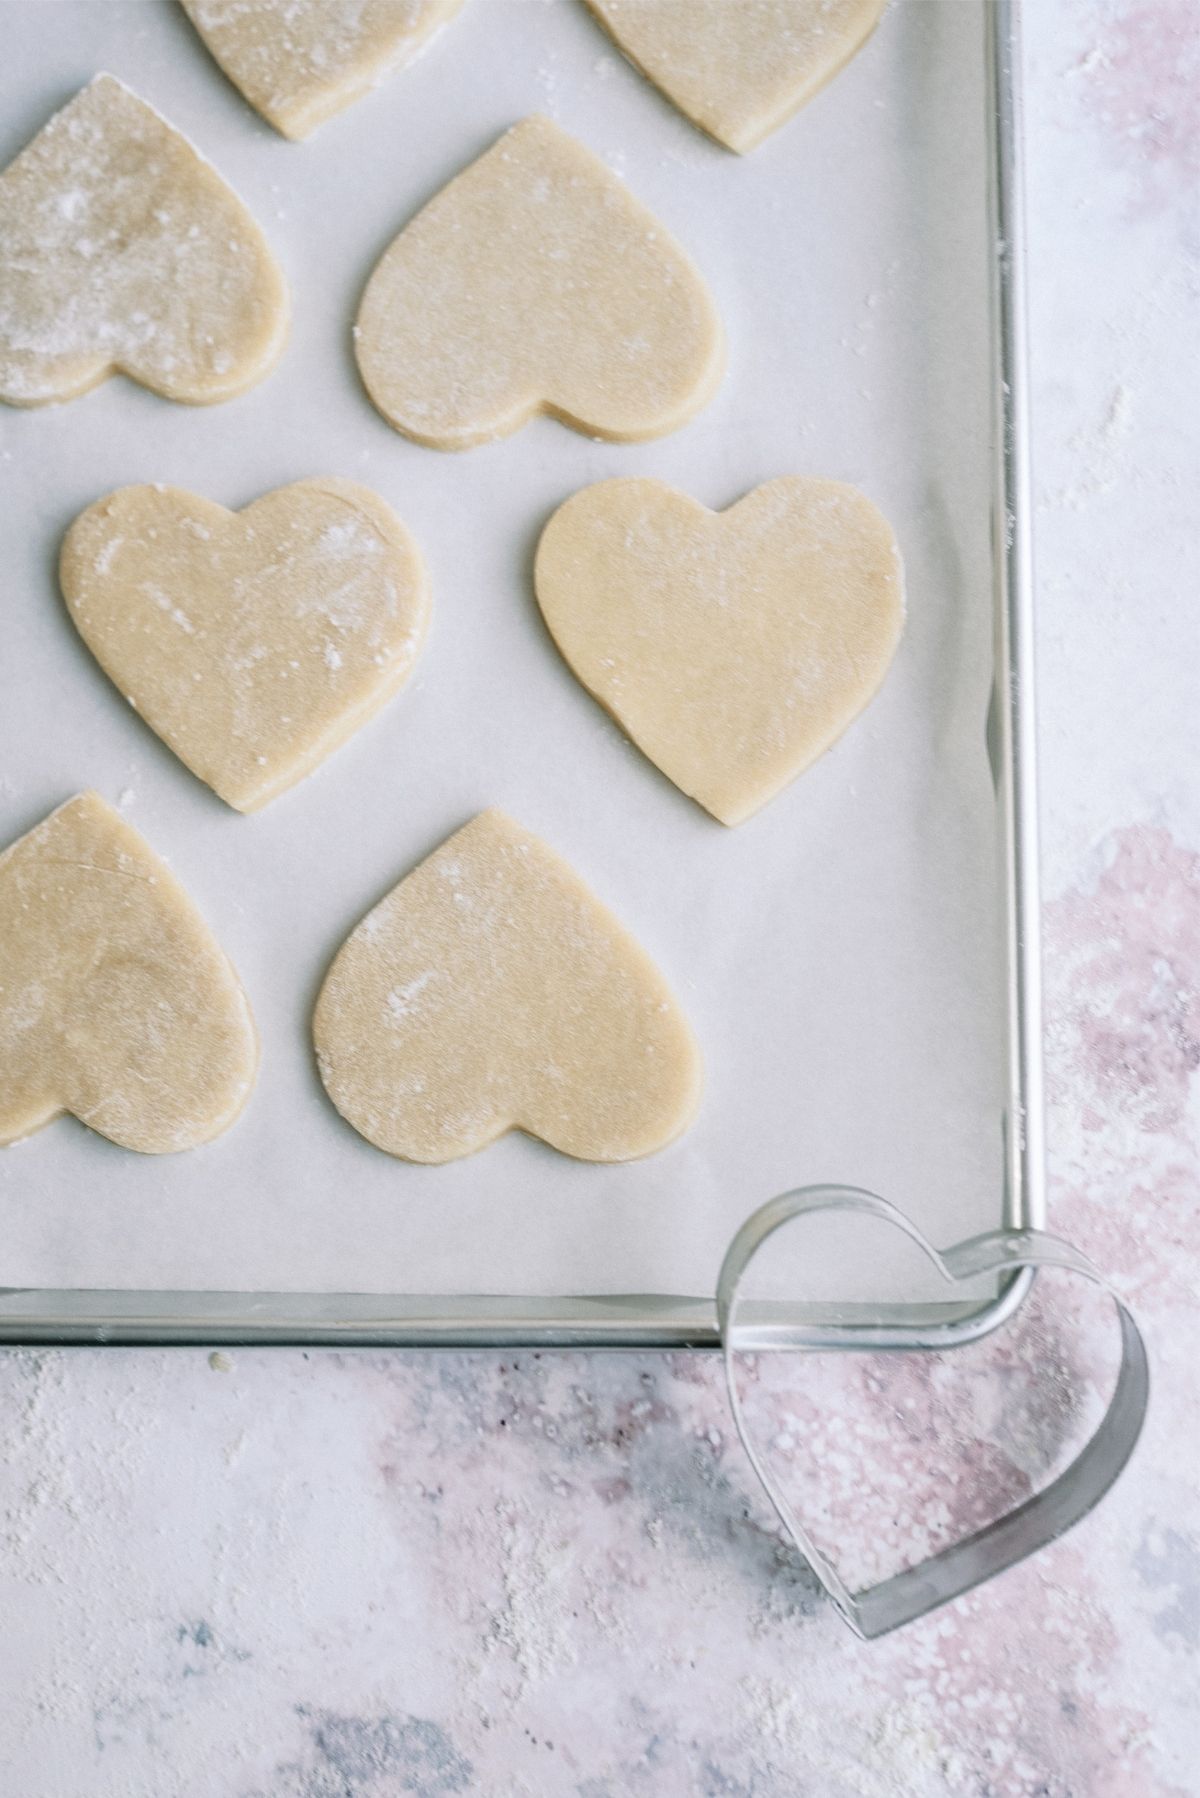 Unbaked heart shaped cookies on a baking sheet with heart shaped cookie cutter